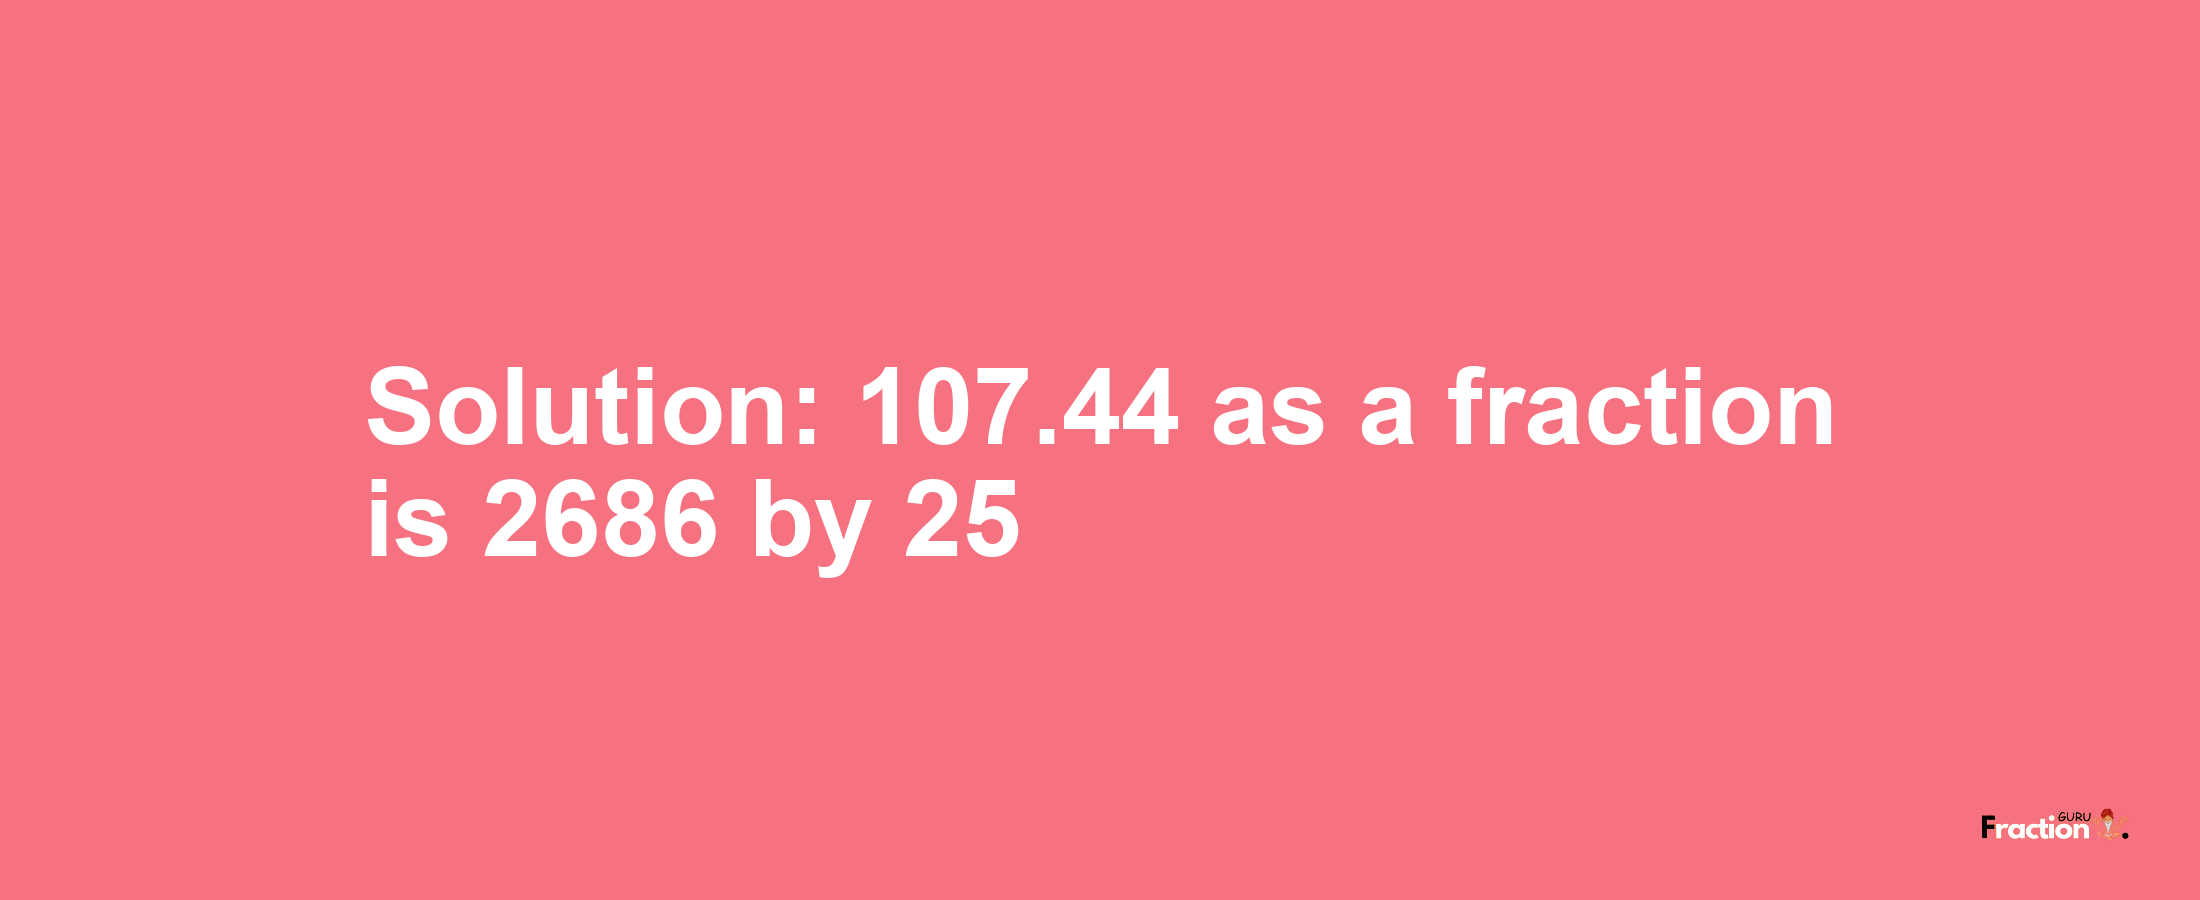 Solution:107.44 as a fraction is 2686/25